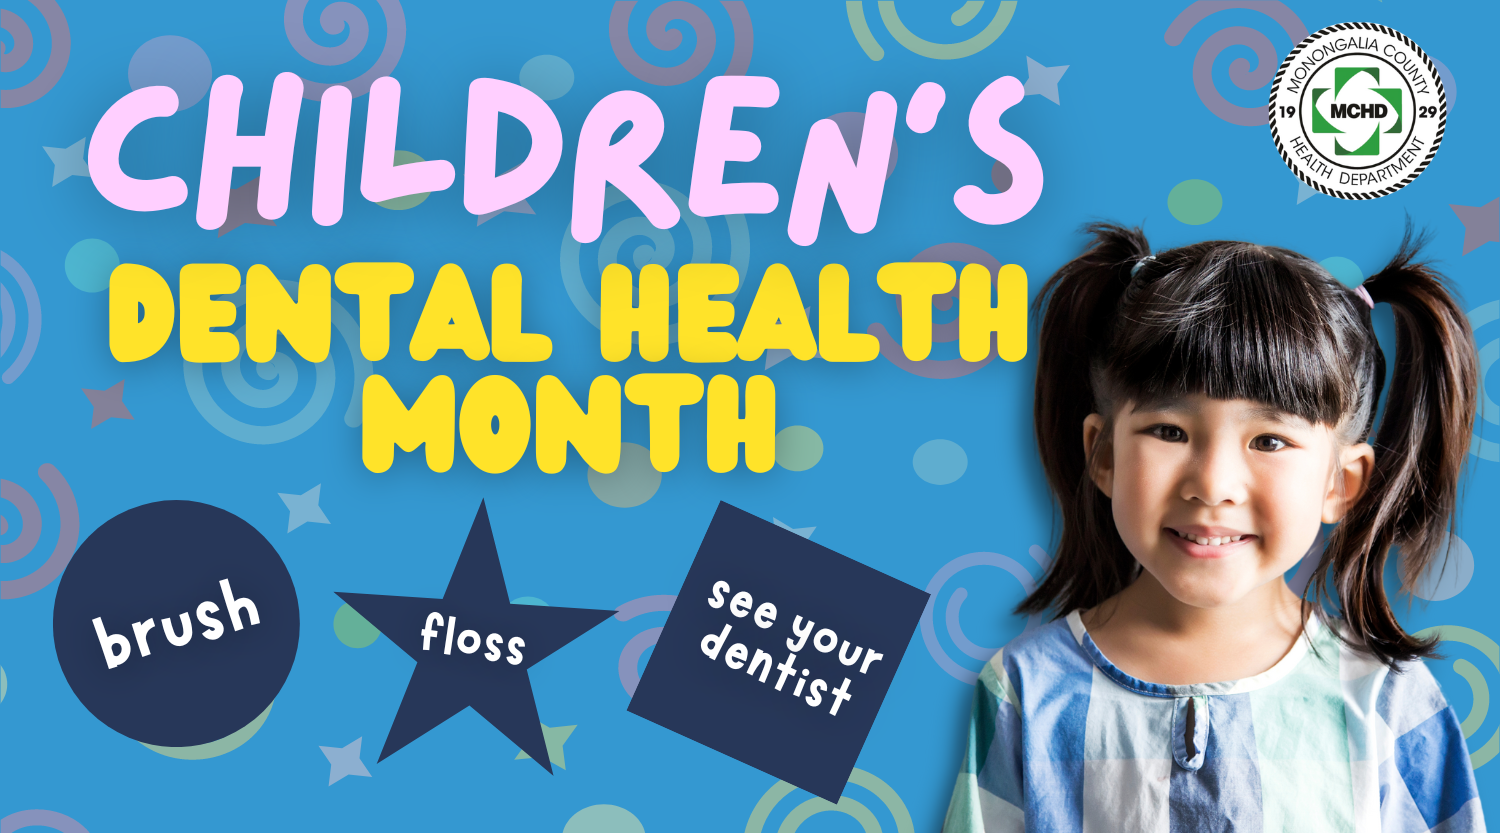 Say cheese! It's Children's Dental Health Month